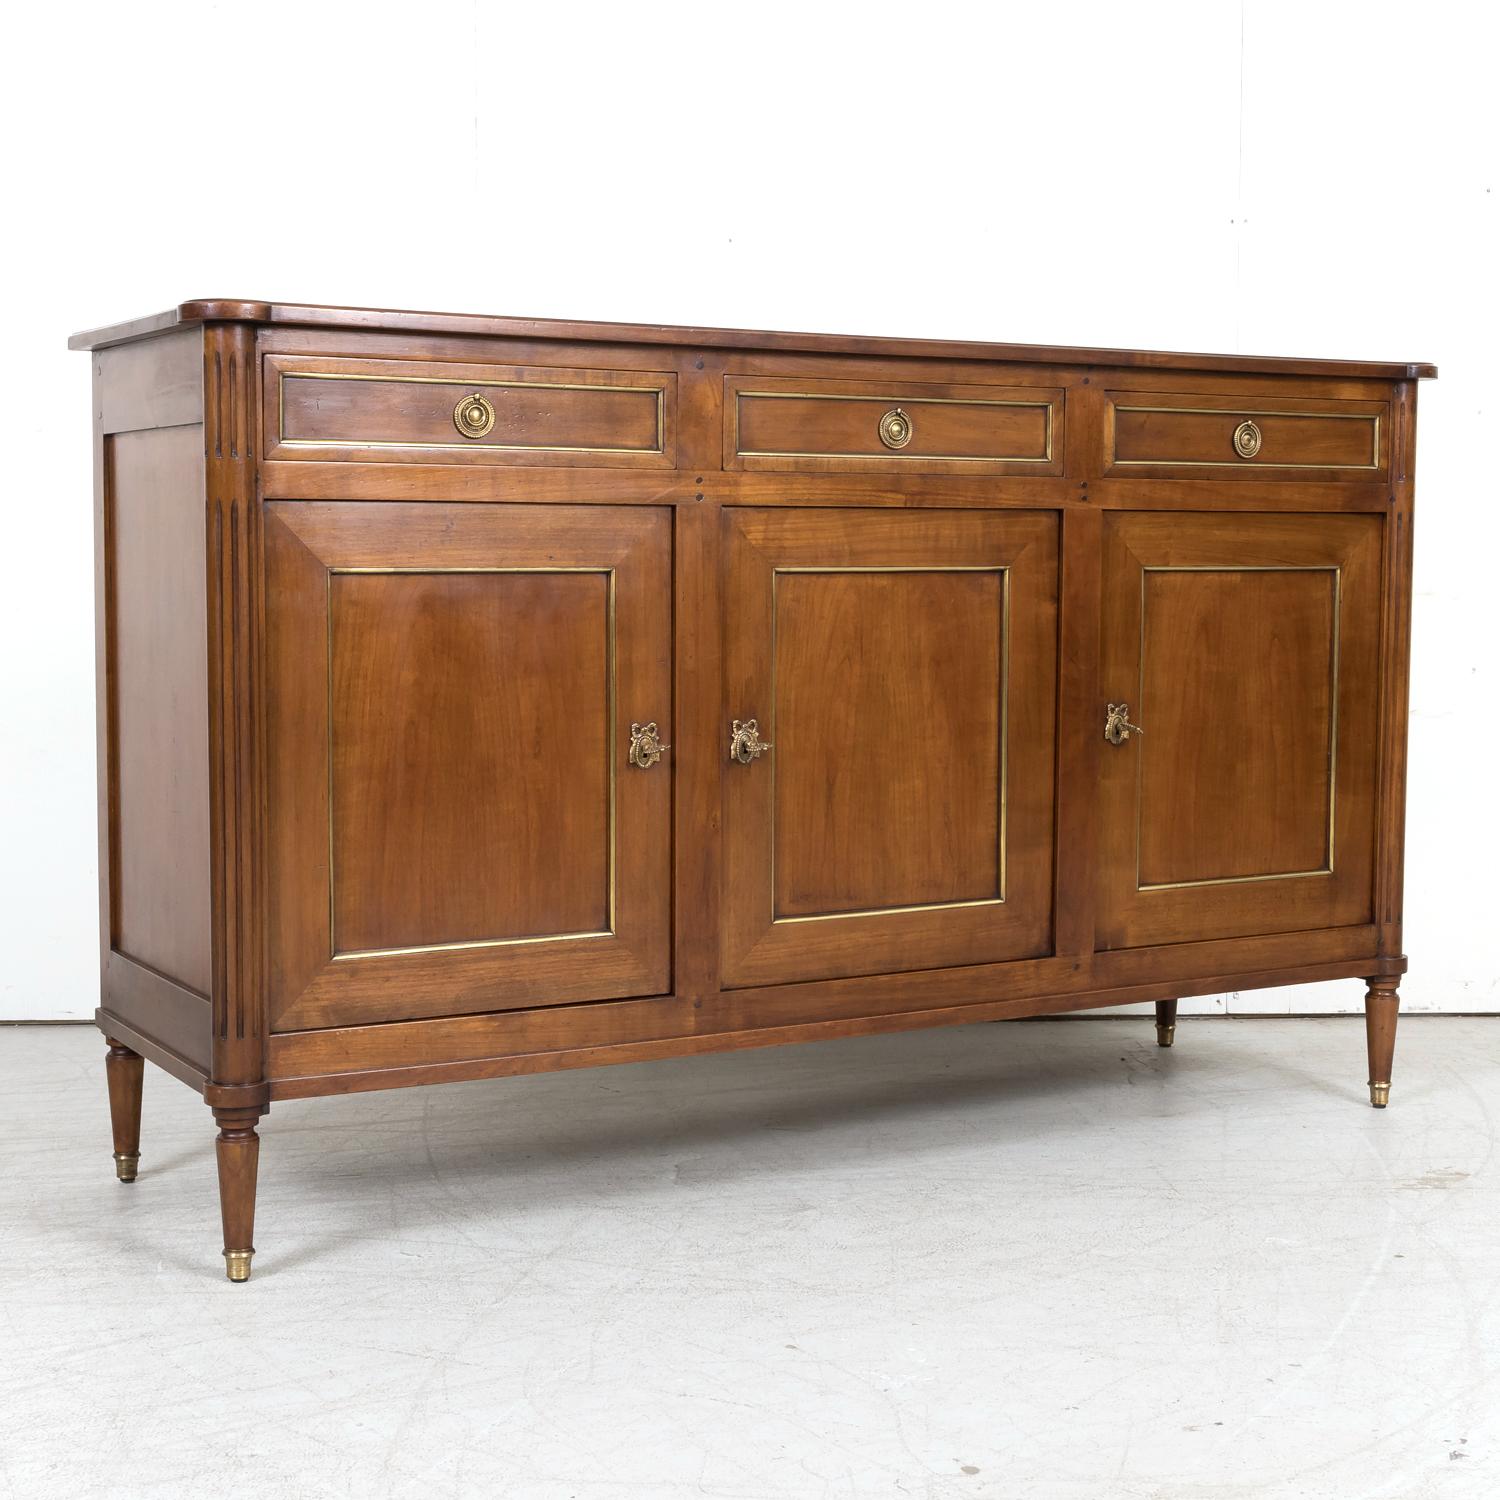 Early 20th Century Antique French Louis XVI Style Enfilade Buffet in Solid Cherry with Brass Trim